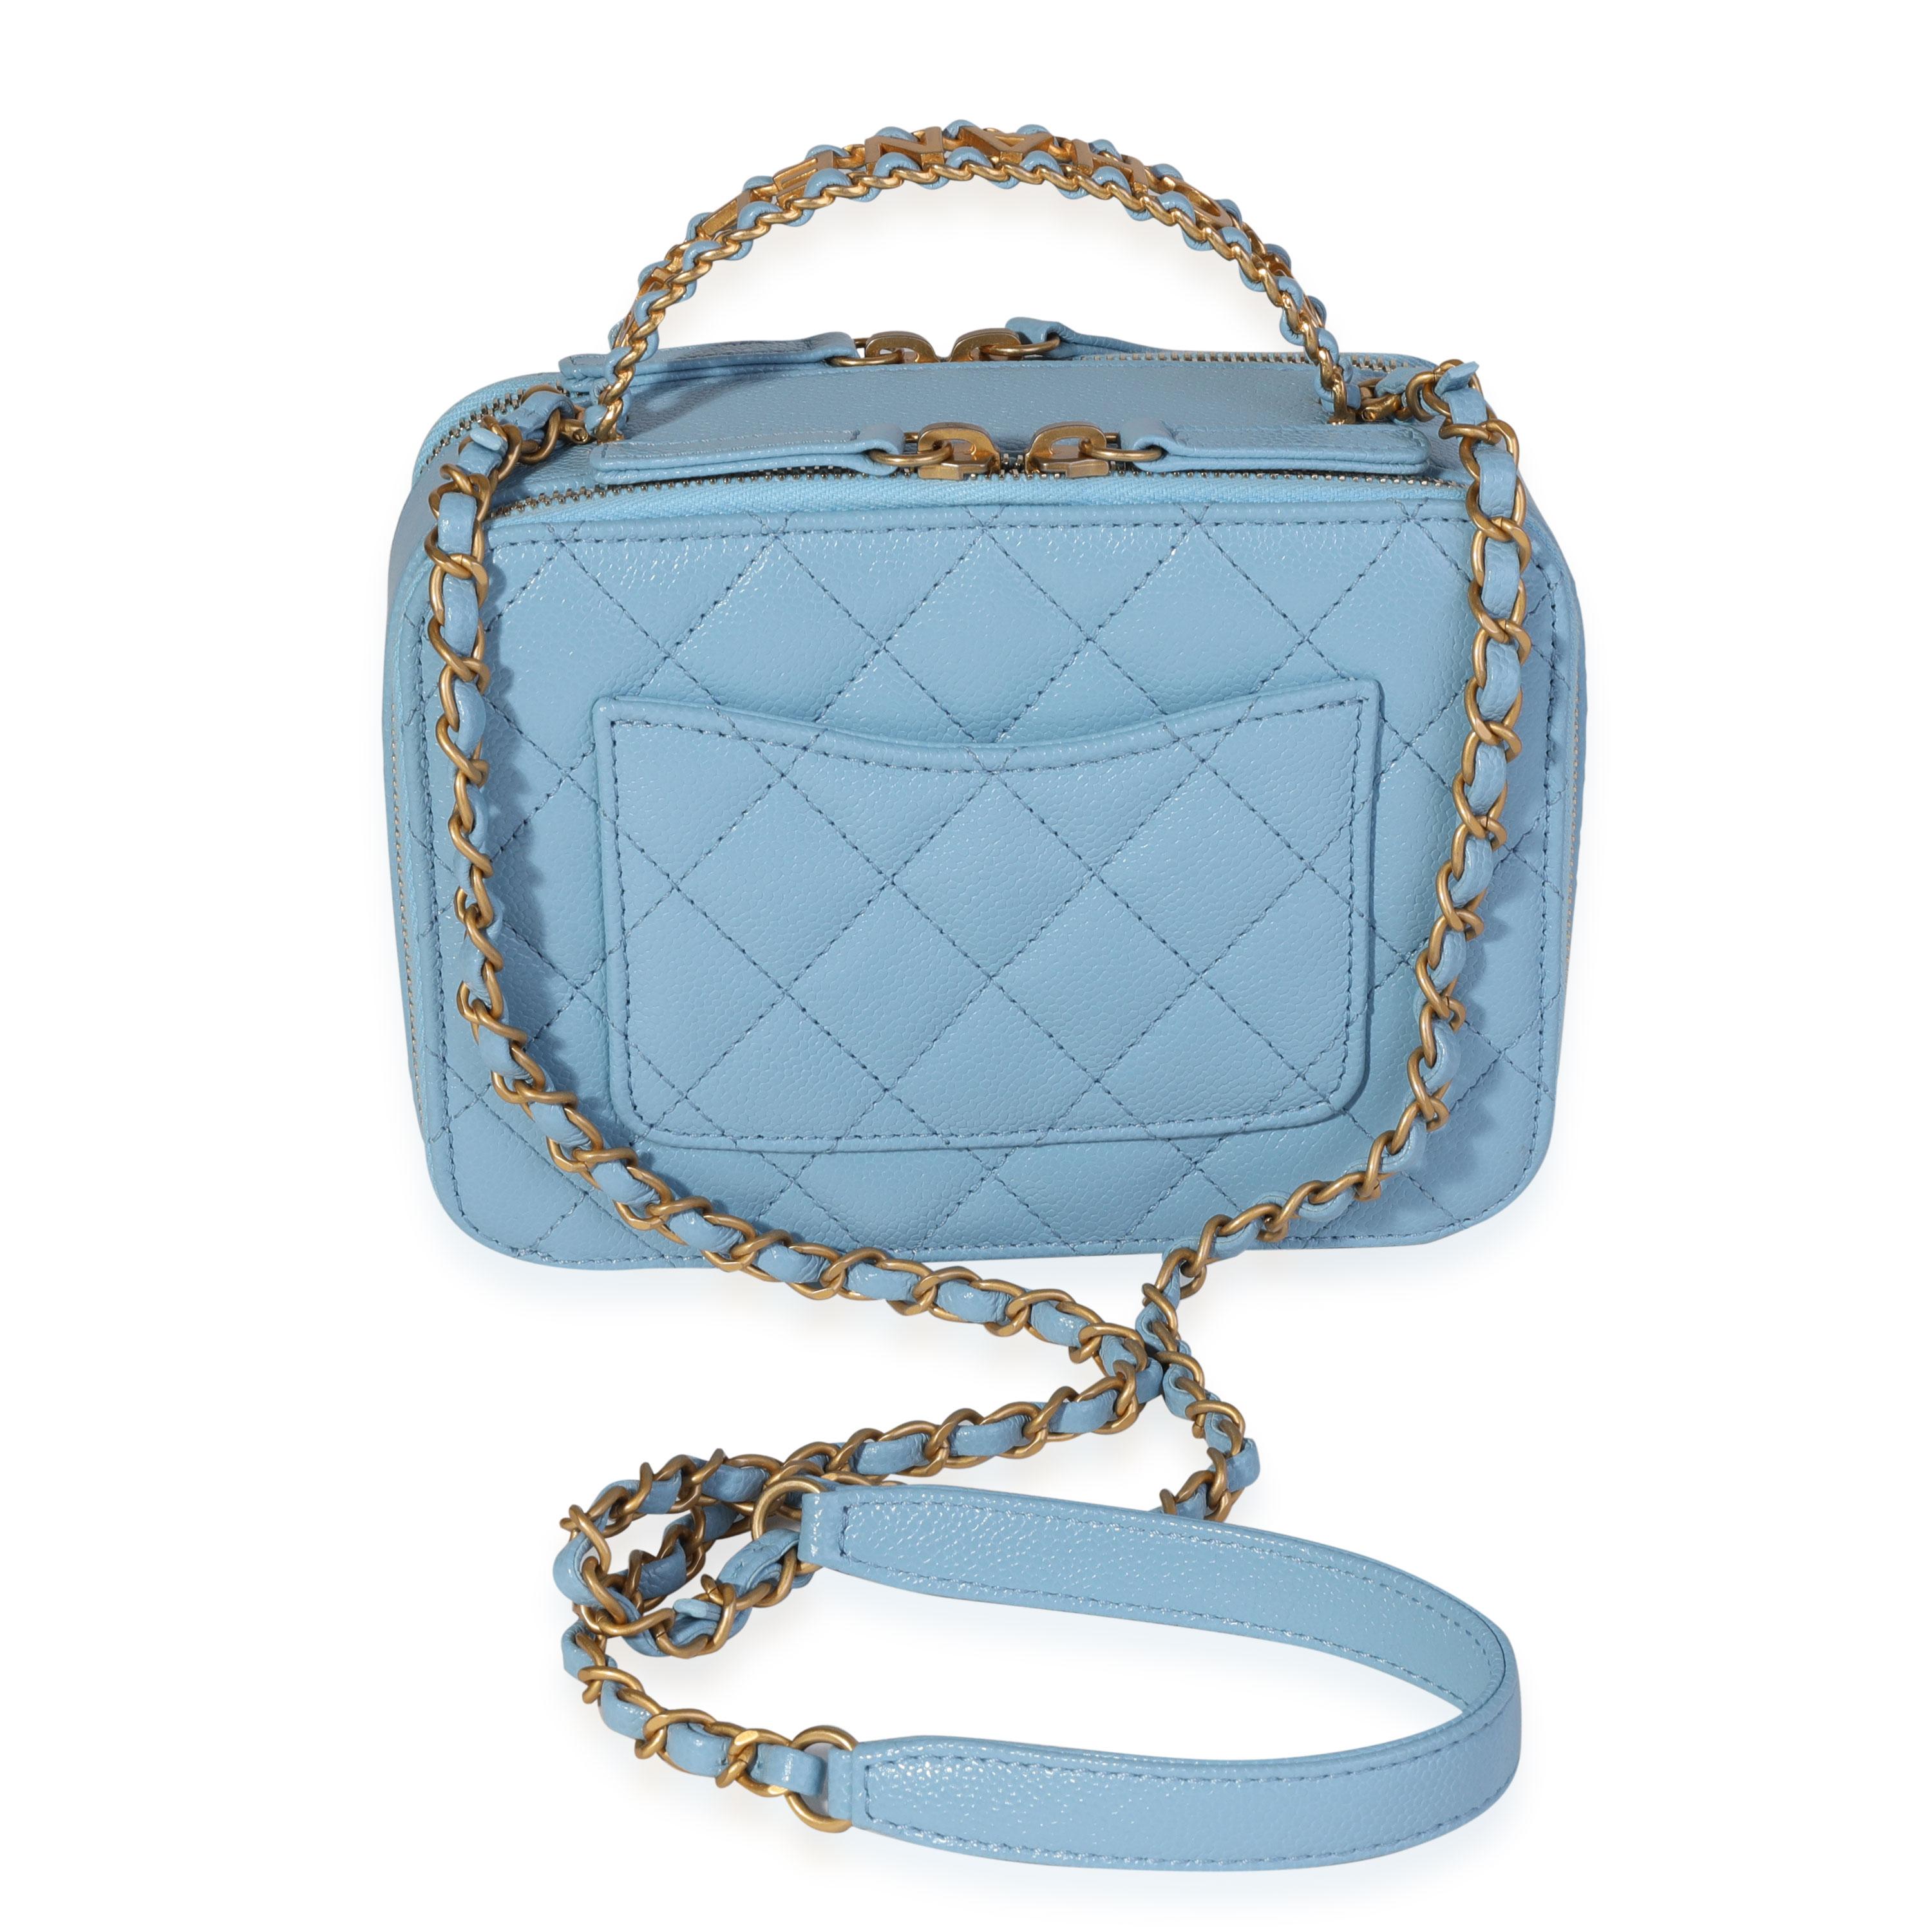 Listing Title: Chanel Light Blue Quilted Caviar Chanel Top Handle Vanity Case
SKU: 120219
MSRP: 5200.00
Condition: Pre-owned 
Handbag Condition: Mint
Condition Comments: Mint Condition. No visible signs of wear.  Final sale.
Brand: Chanel
Model: